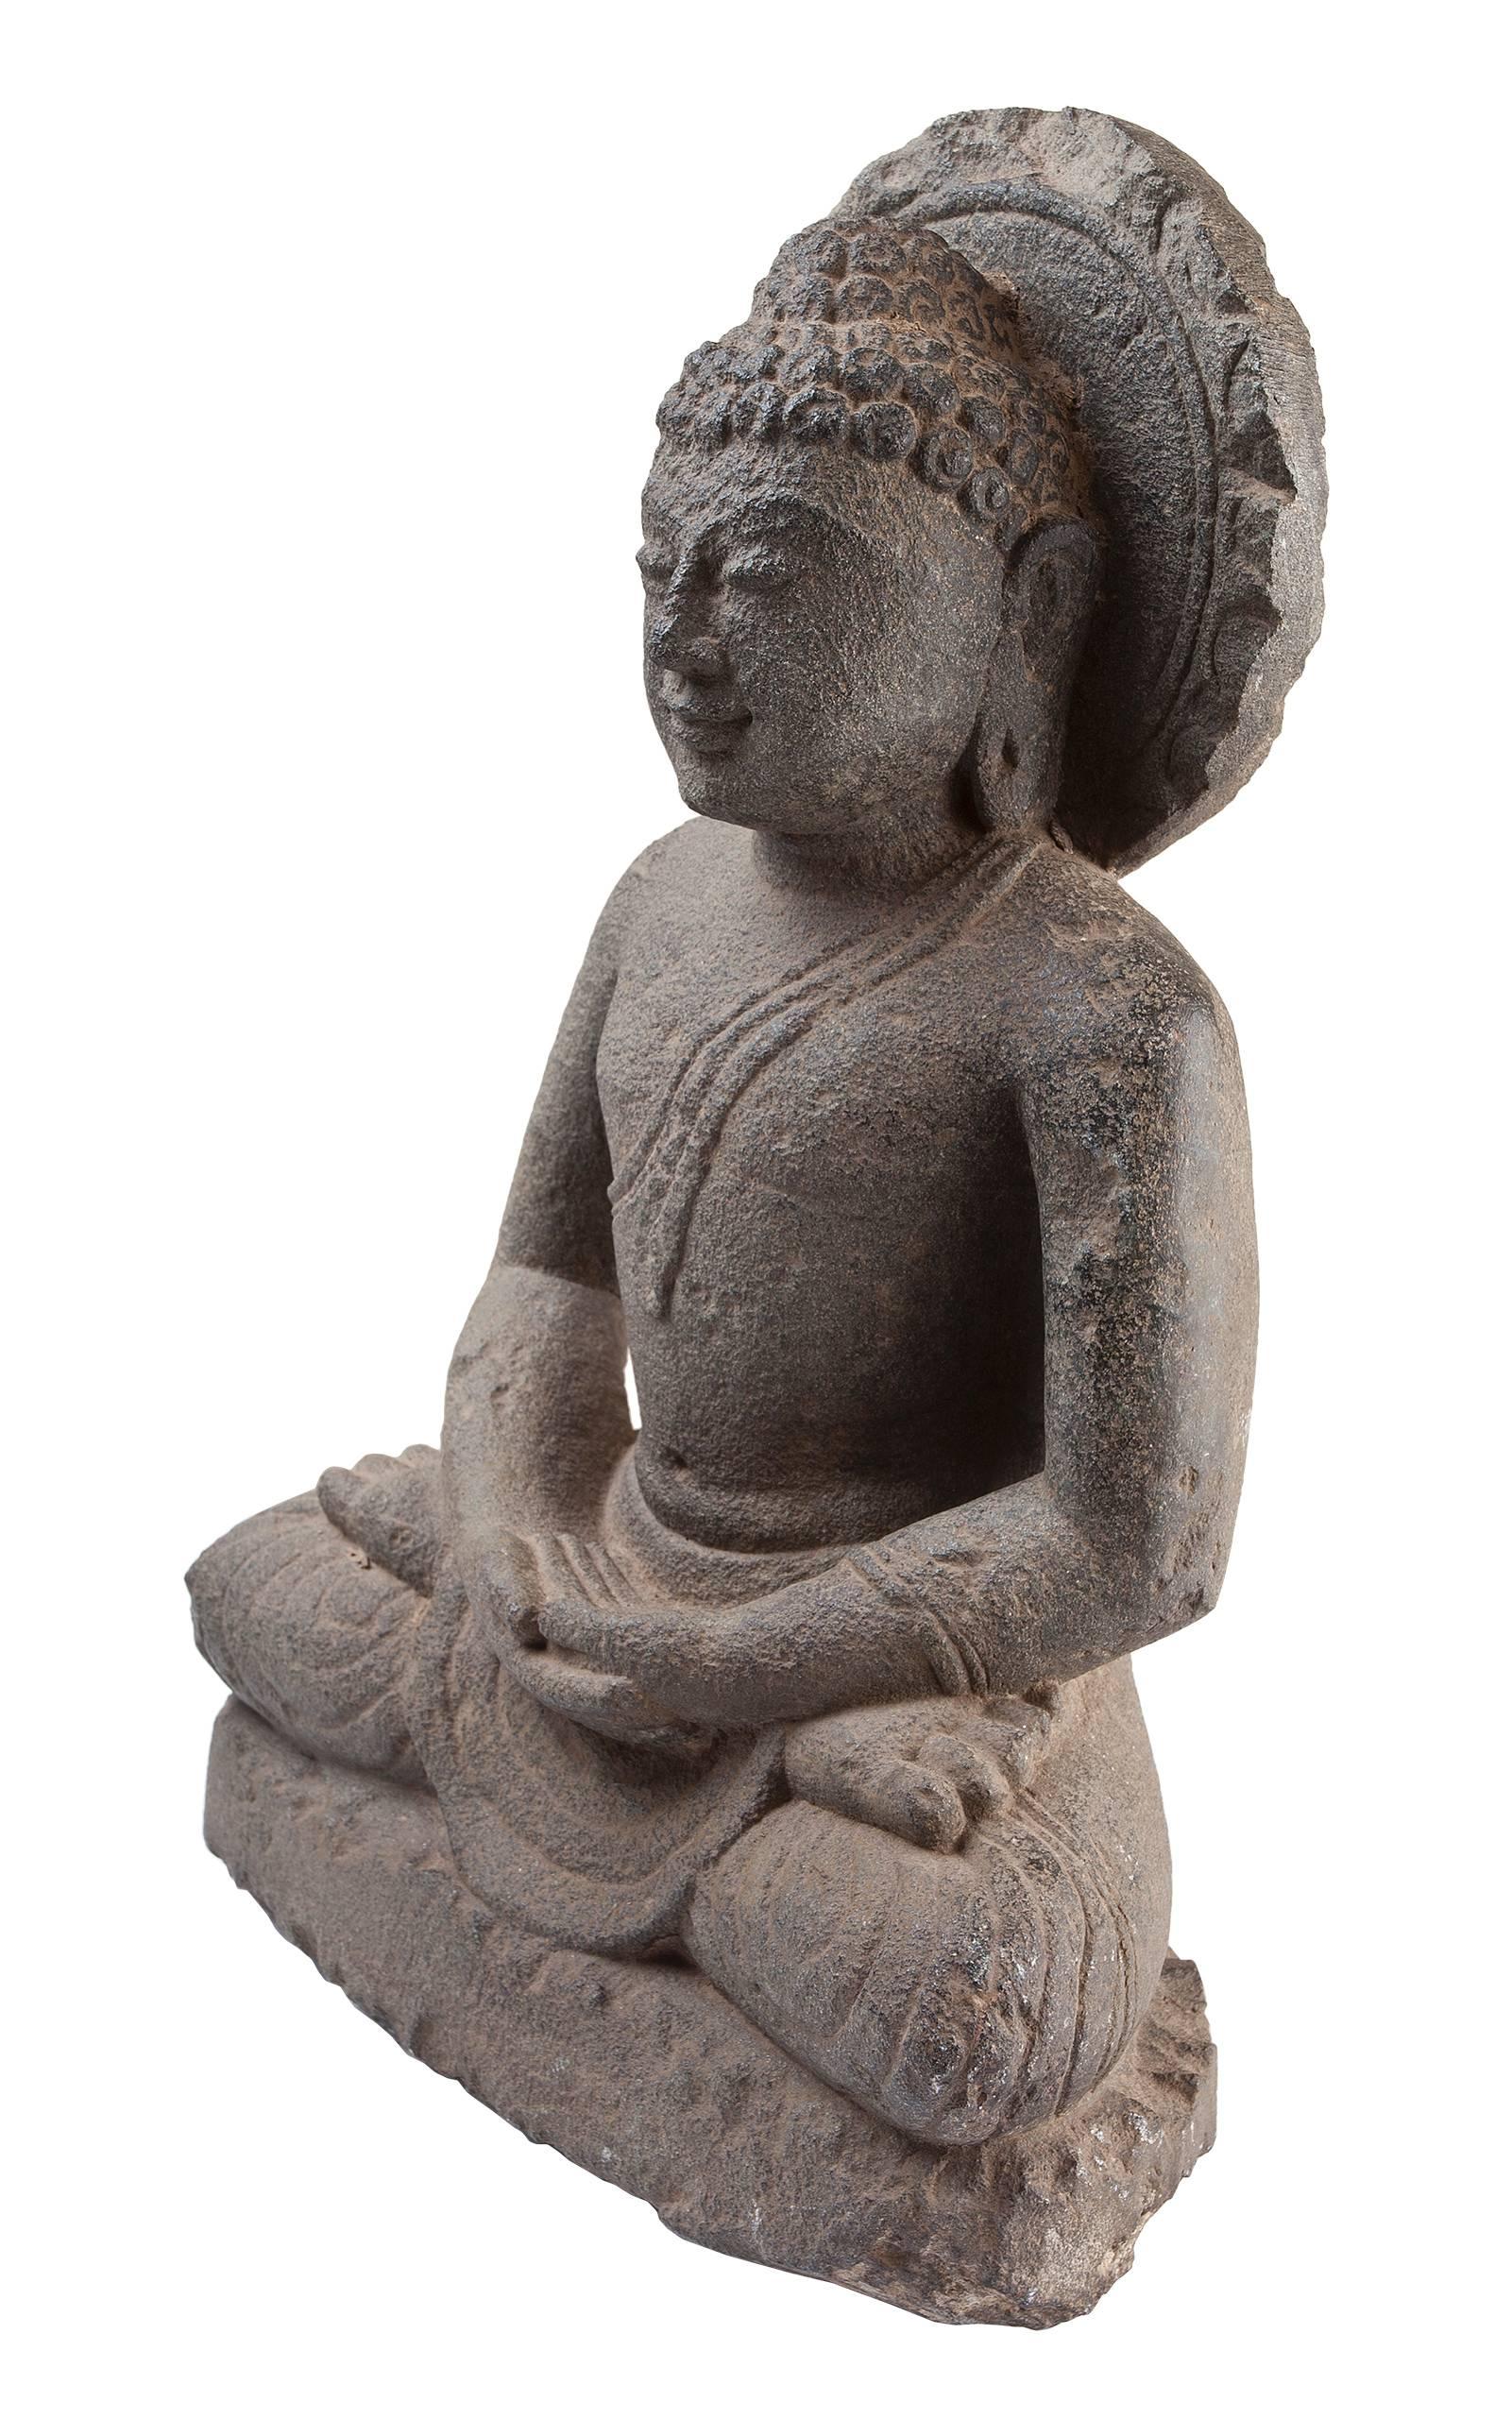 Full-form sitting Buddha with surrounding halo in a meditation posture or mudra. Specifically, the Dhyana mudra. Granite, 19th C, India.  The Dhyana mudra is the mudra of meditation, of concentration on the Good law, and of the attainment of